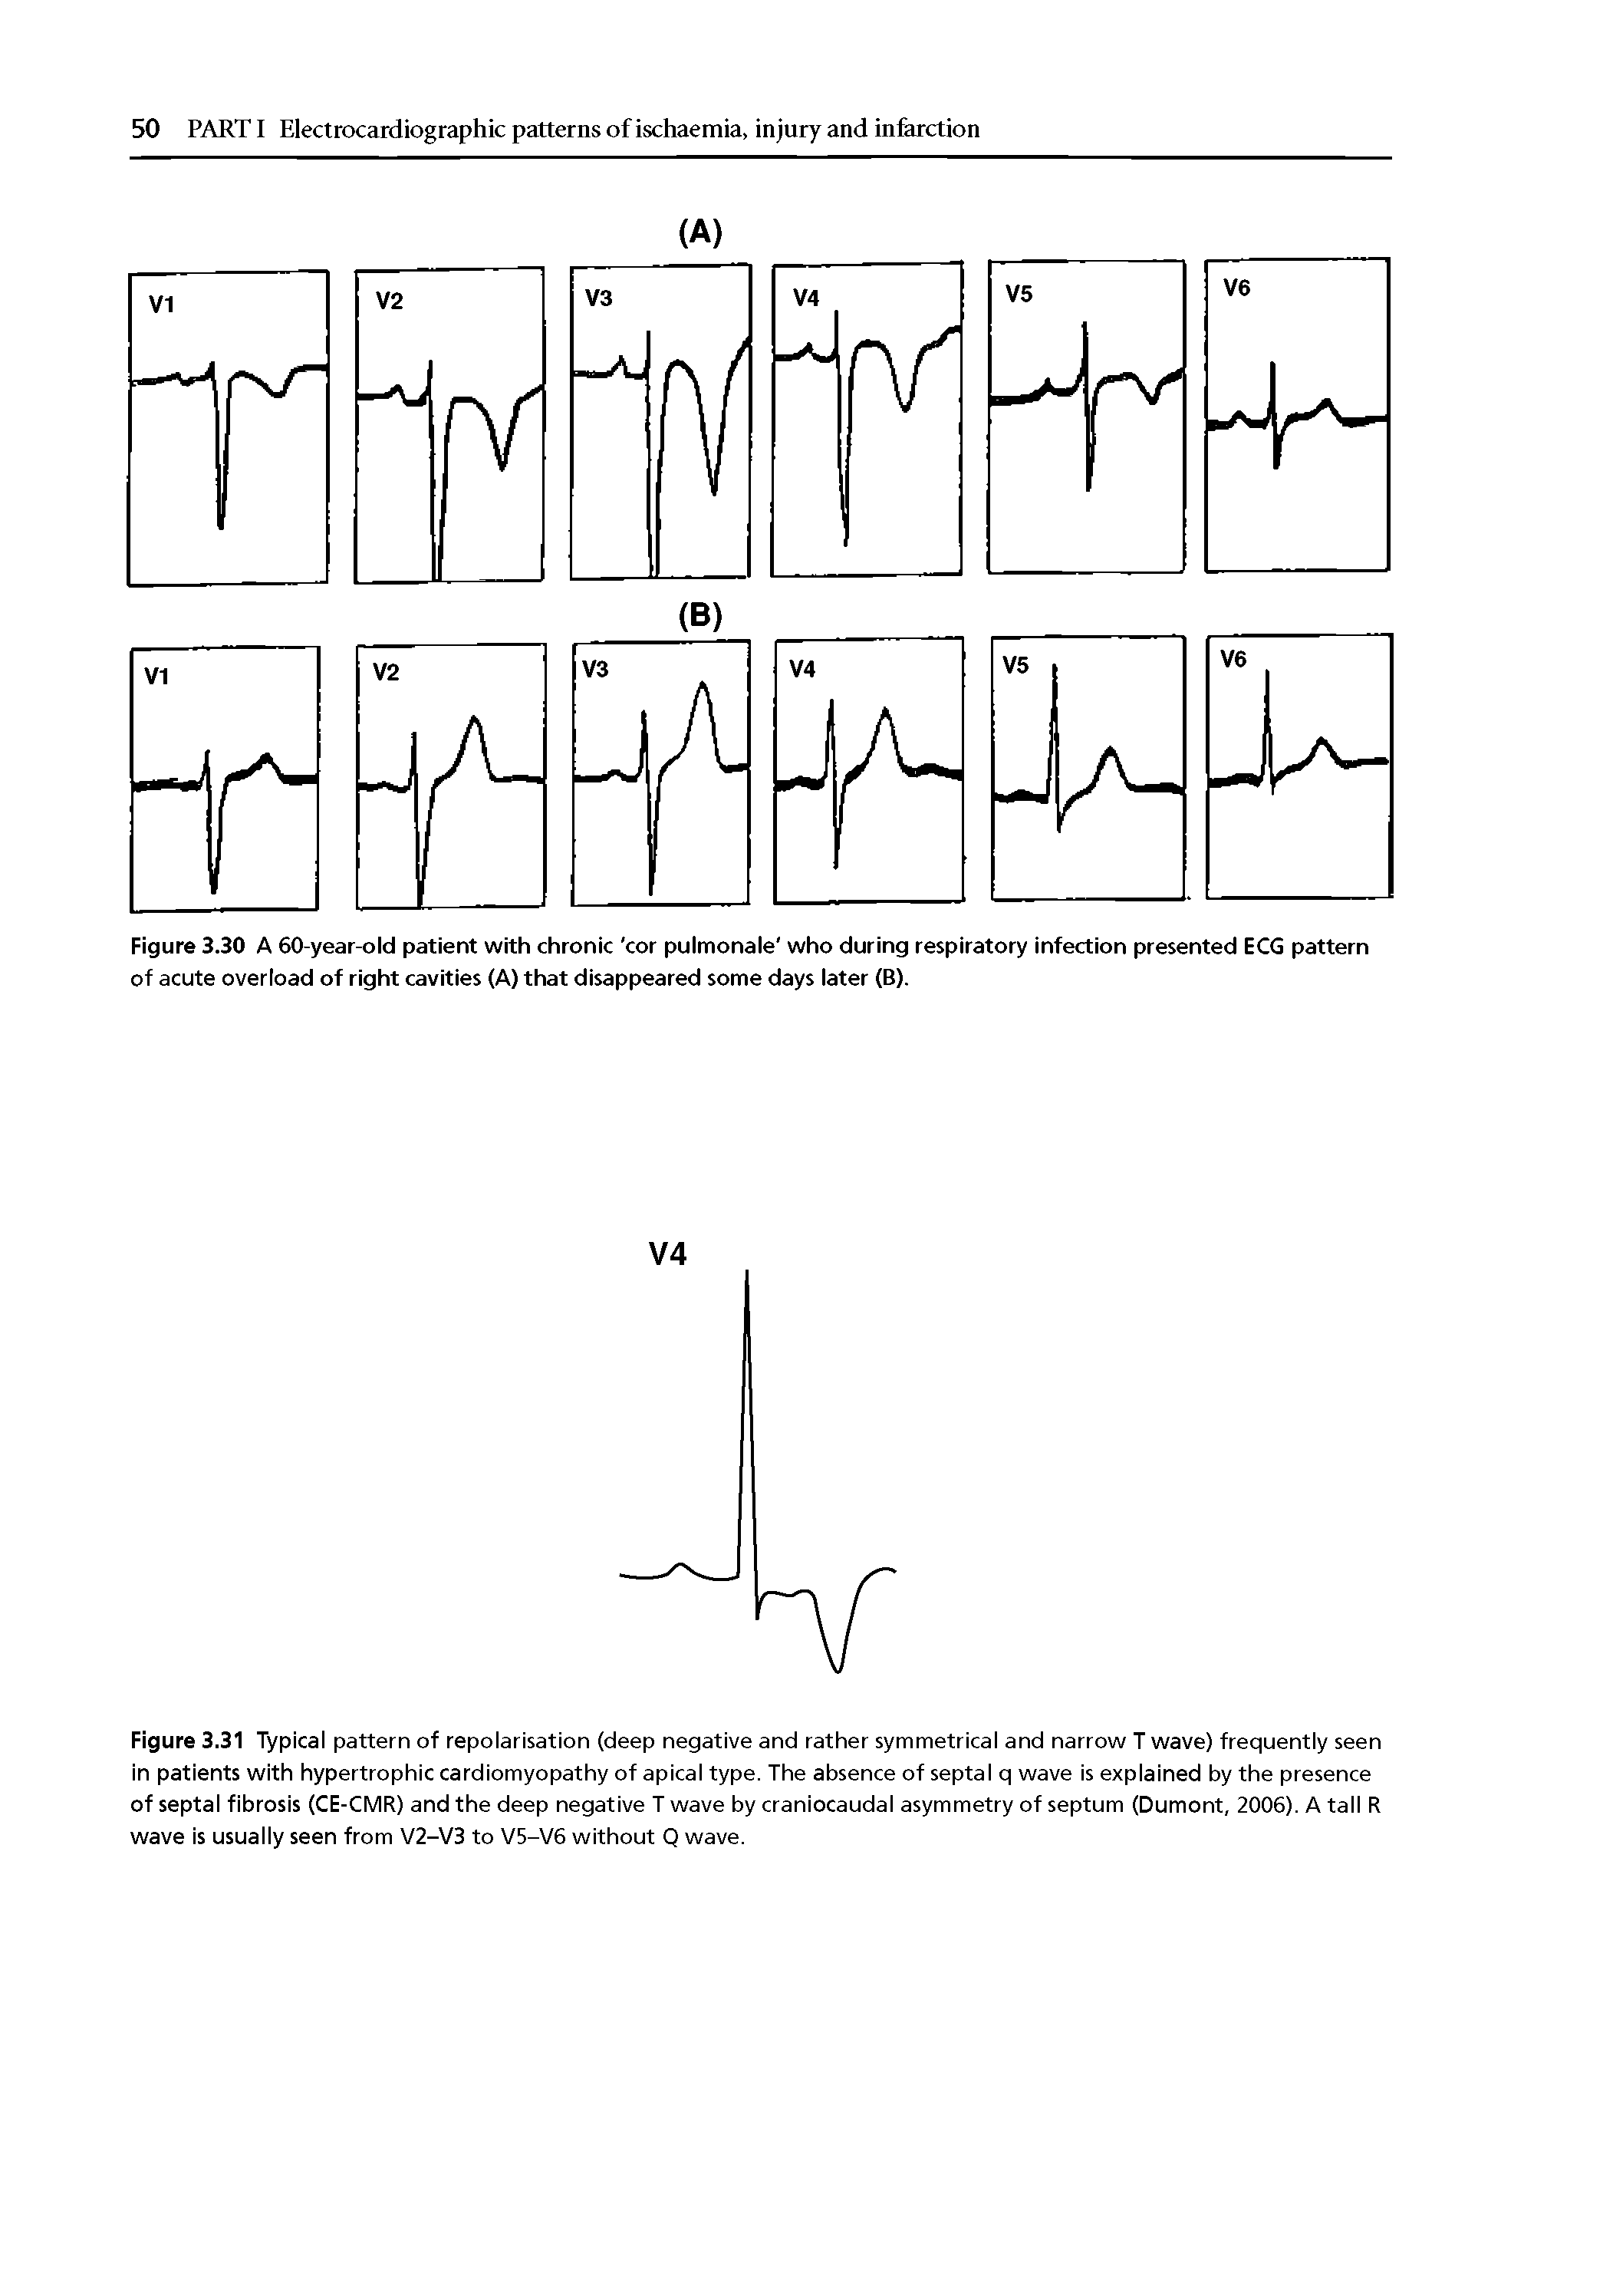 Figure 3.31 Typical pattern of repolarisation (deep negative and rather symmetrical and narrow T wave) frequently seen in patients with hypertrophic cardiomyopathy of apical type. The absence of septal q wave is explained by the presence of septal fibrosis (CE-CMR) and the deep negative T wave by craniocaudal asymmetry of septum (Dumont, 2006). A tall R wave is usually seen from V2-V3 to V5-V6 without Q wave.